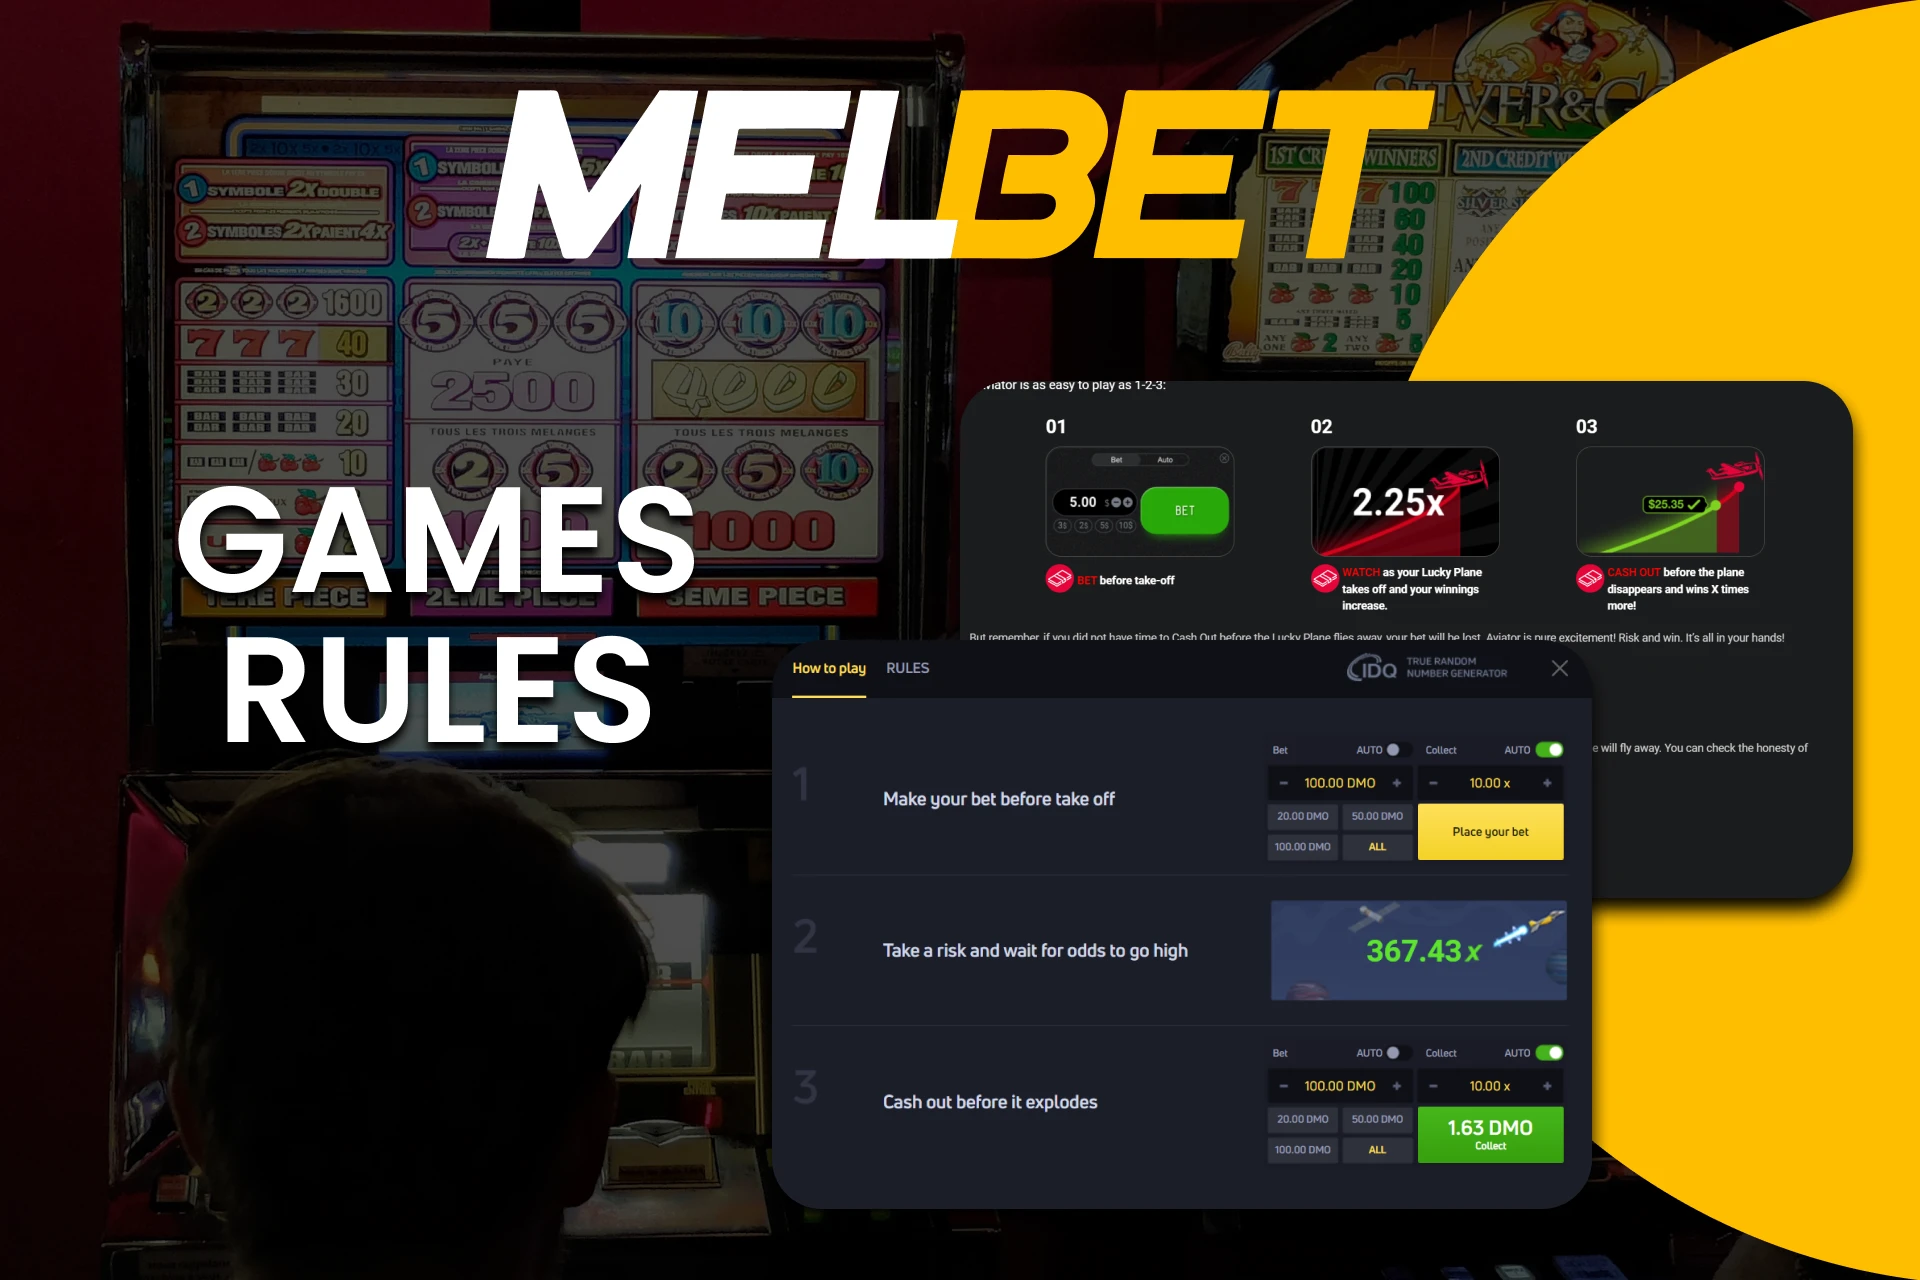 Learn the game rules for winning crash games on Melbet.